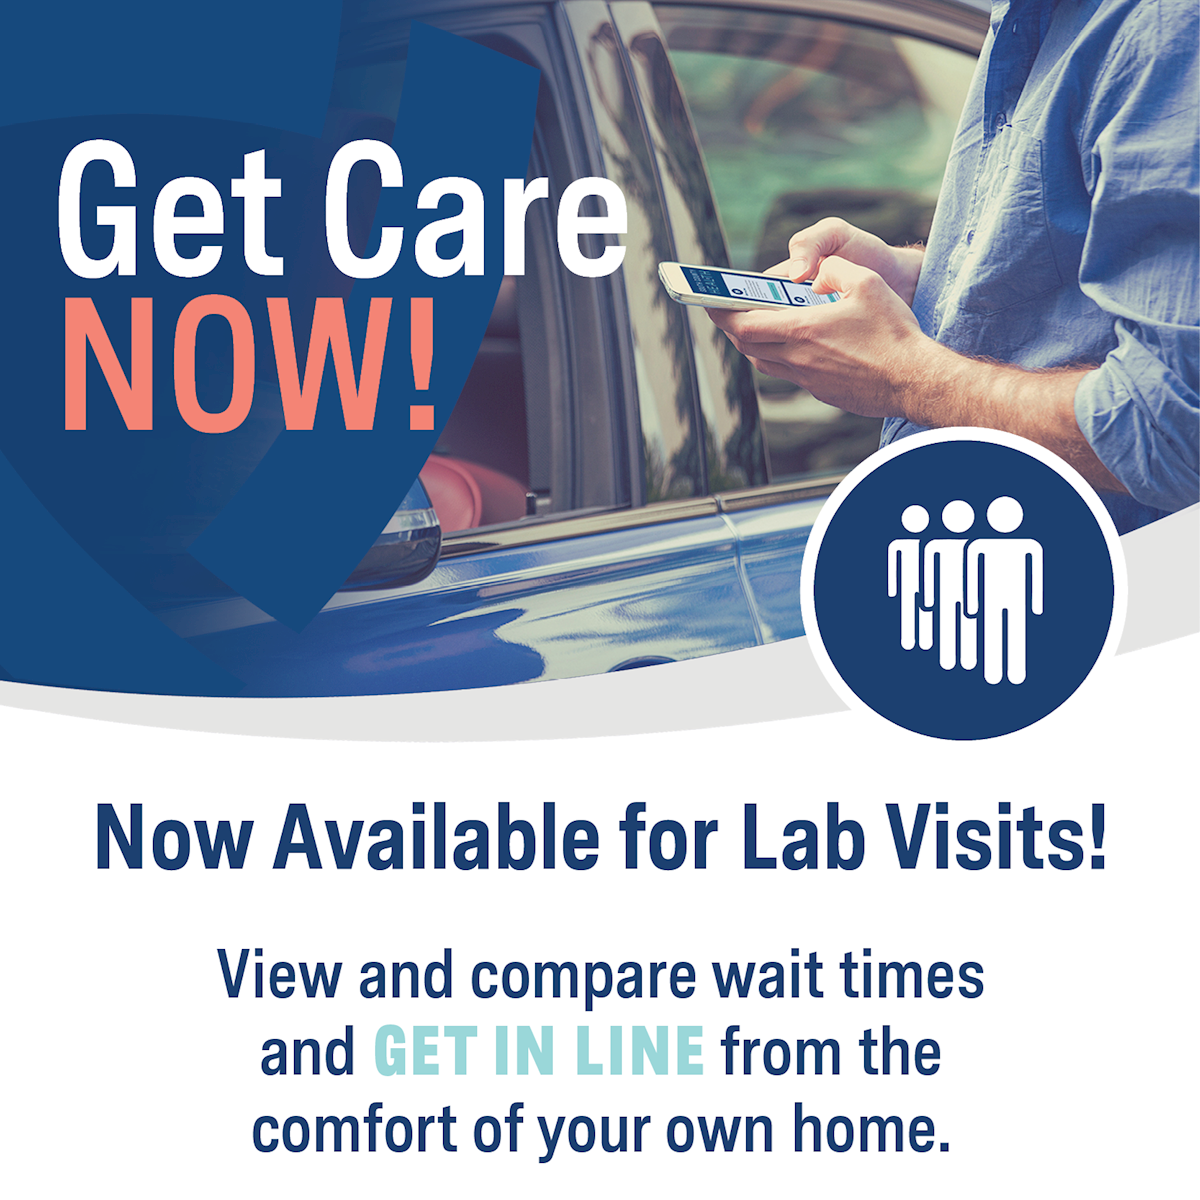 "Get in Line" Feature Now Available for Lab Visits